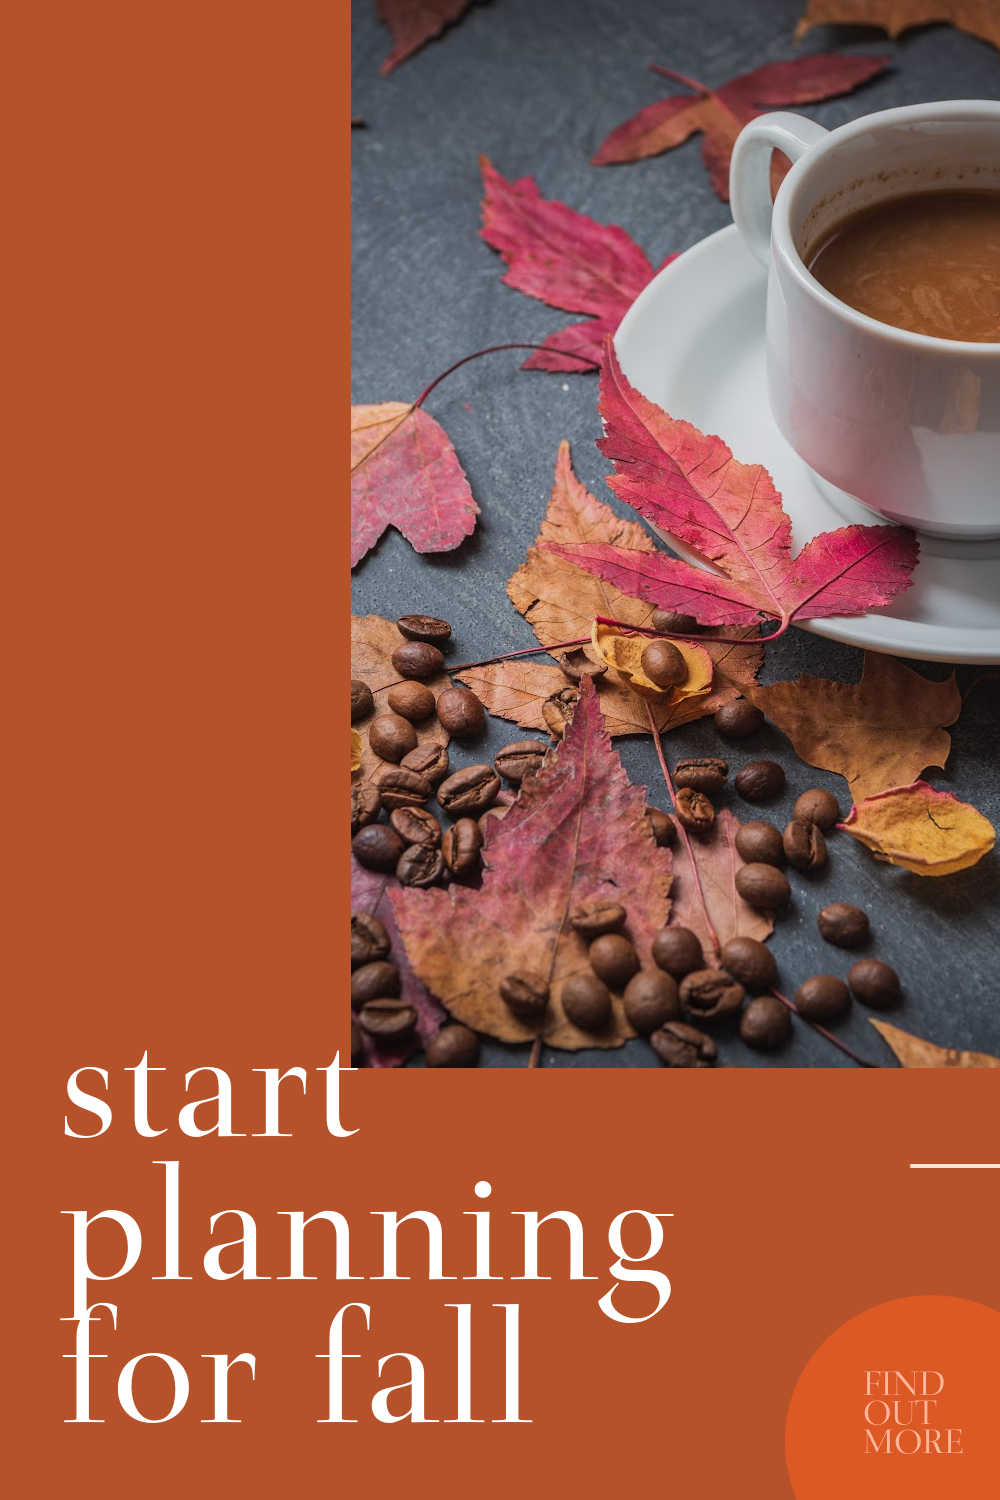 PLANNING FOR FALL